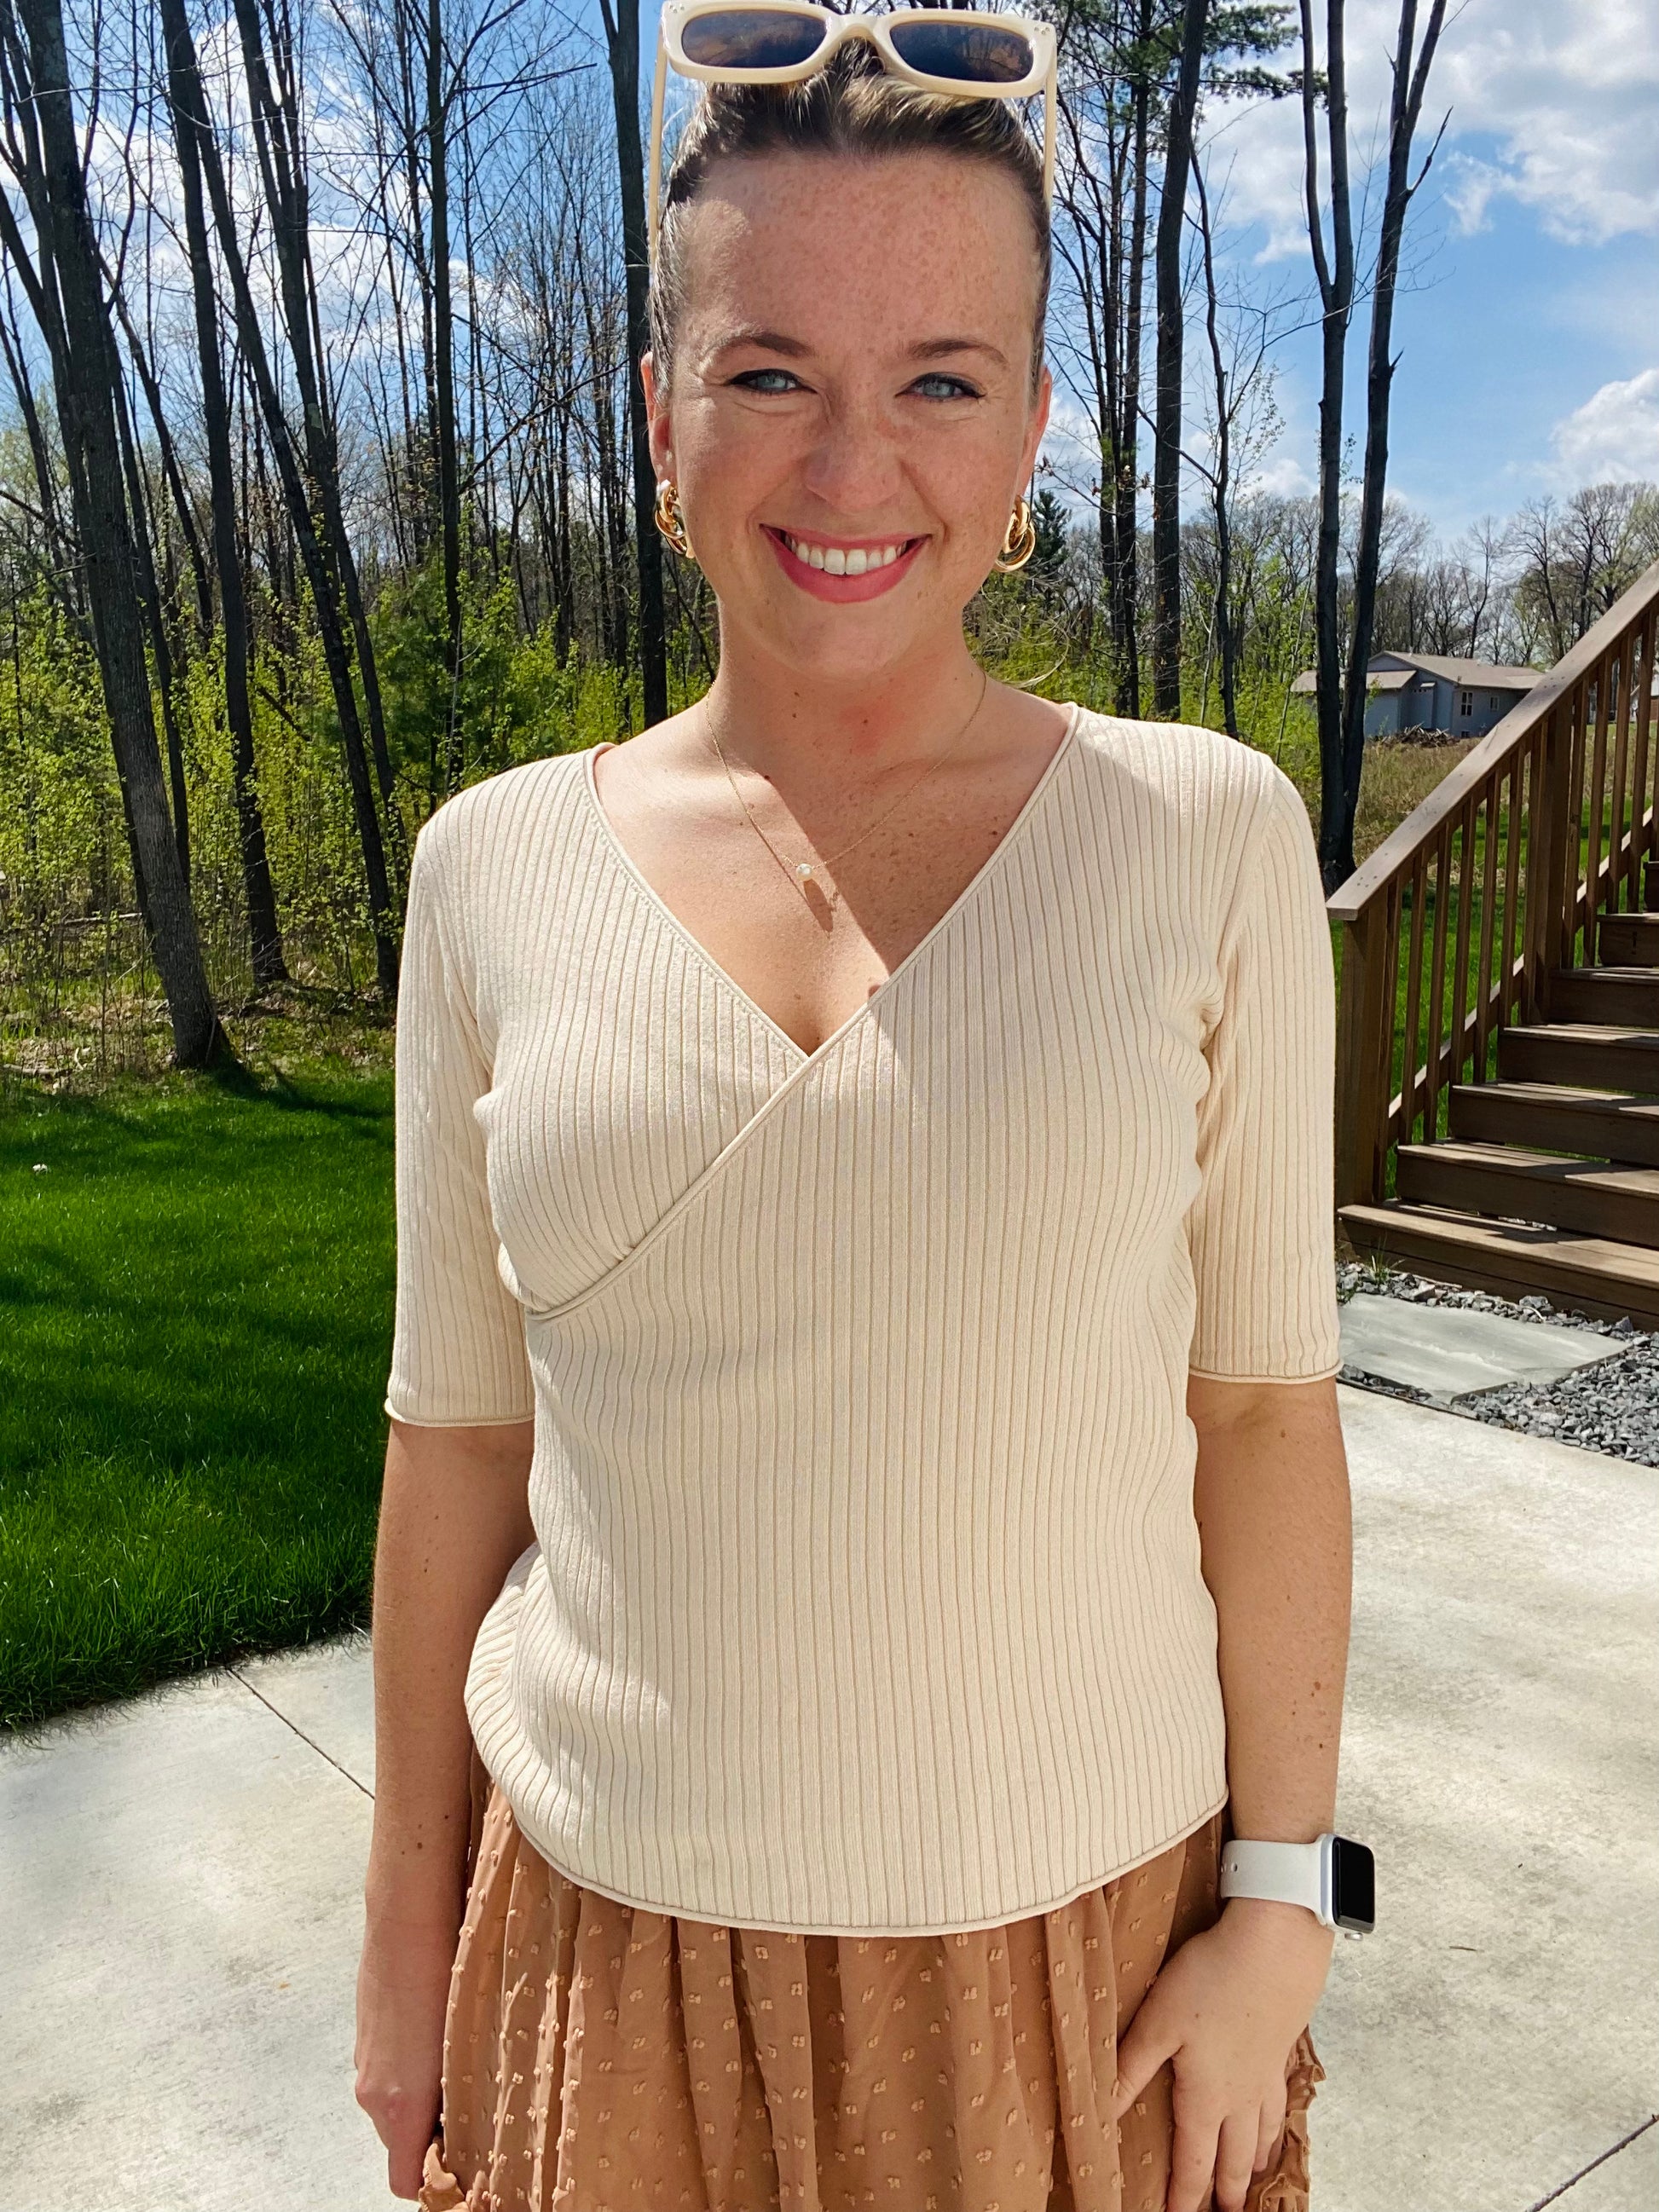 This Apricot Rib Knit Half Sleeve Top easily adapts to any occasion. With its classic style and ribbed fabric, it ensures unbeatable comfort. The unique criss cross hemline provides a unique touch, while its versatile size allows for tucking or leaving it untucked. Enjoy effortless chic style.